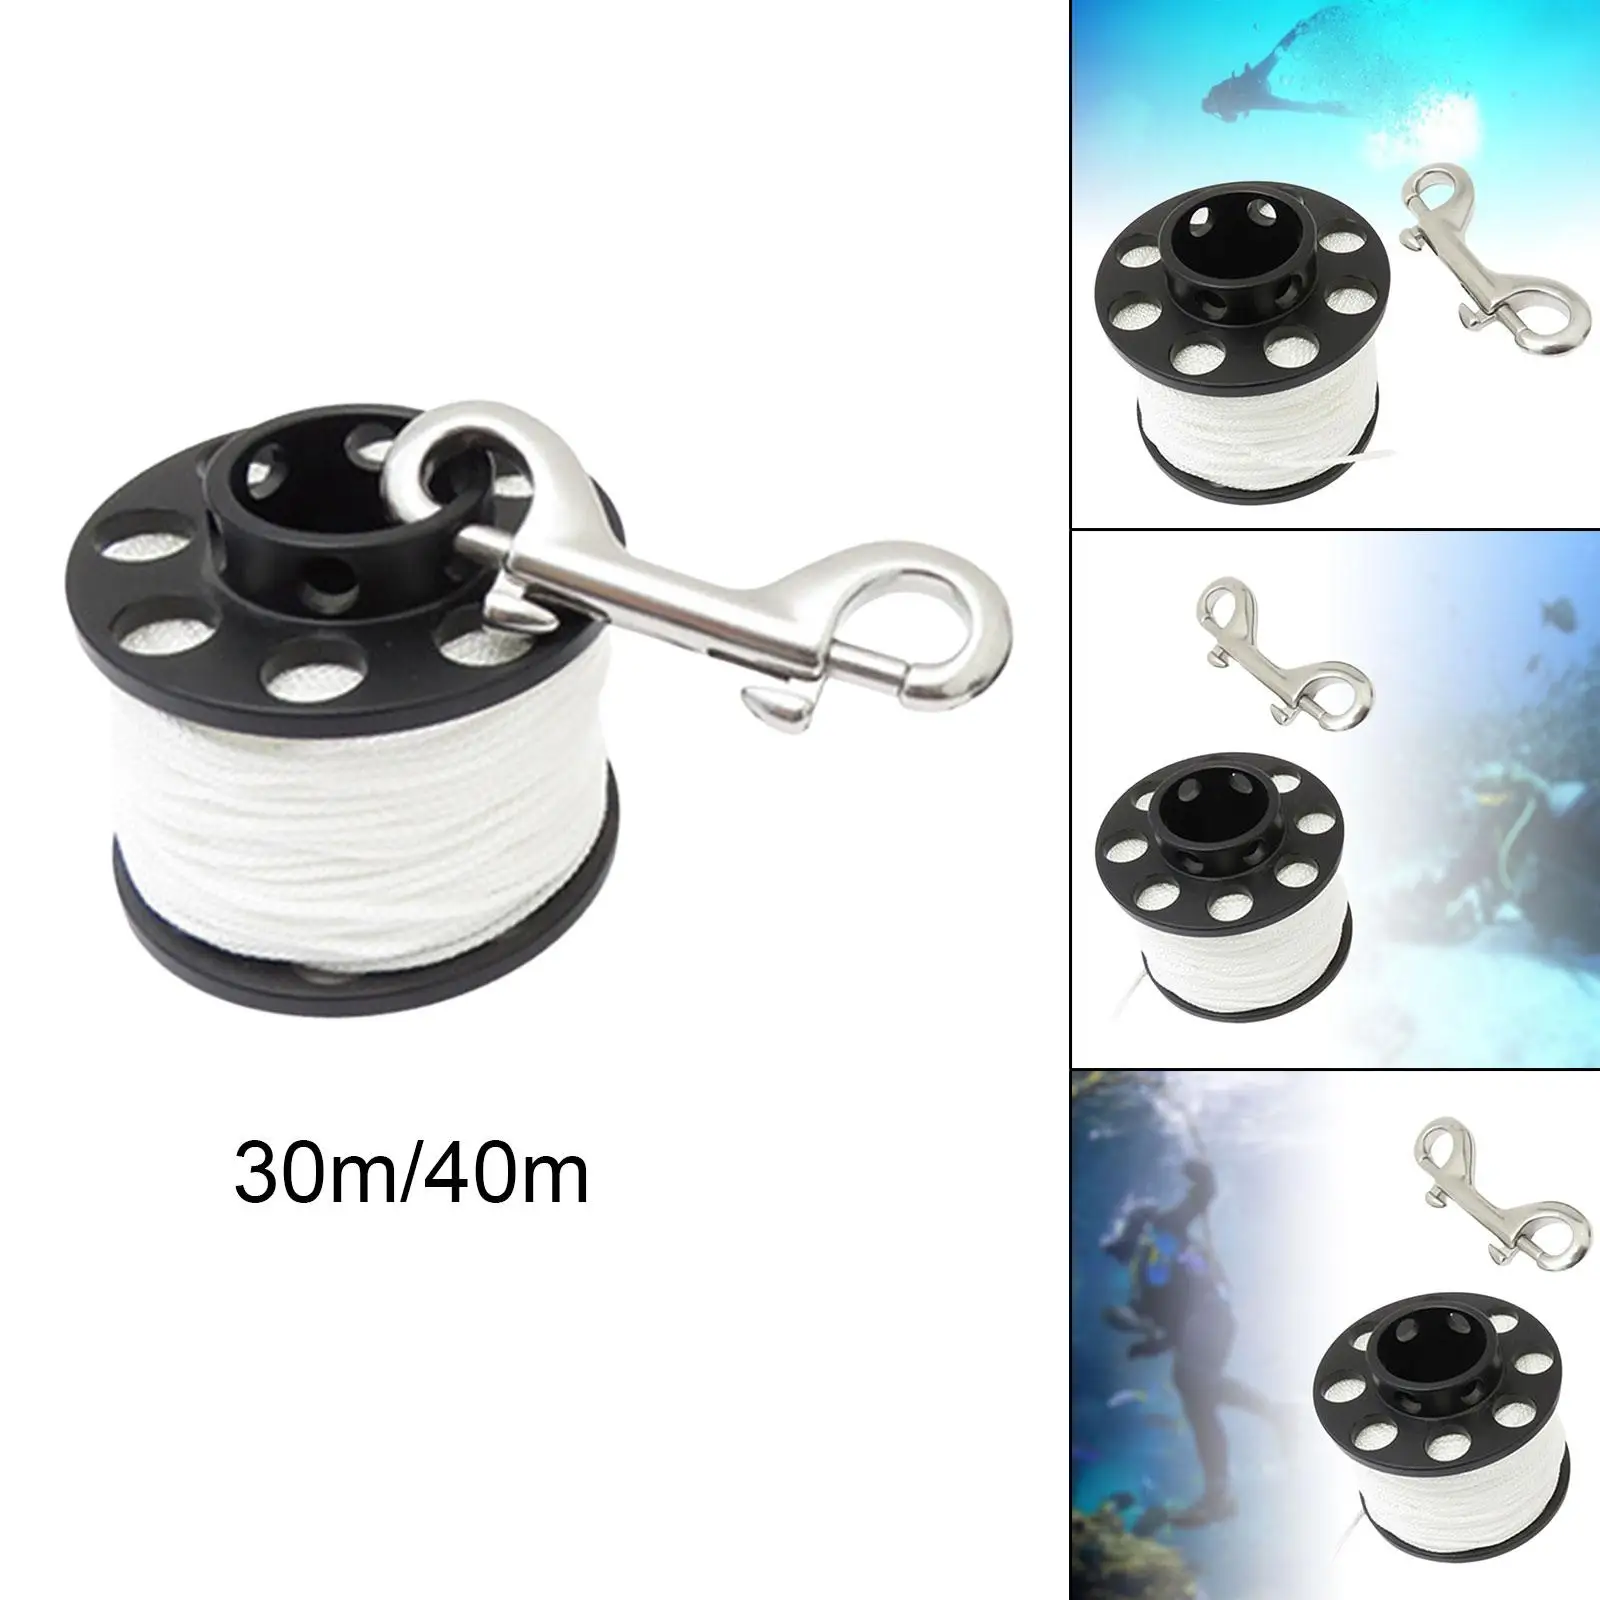 Dive reel , diving reel with high visibility, compact diving reel for activities